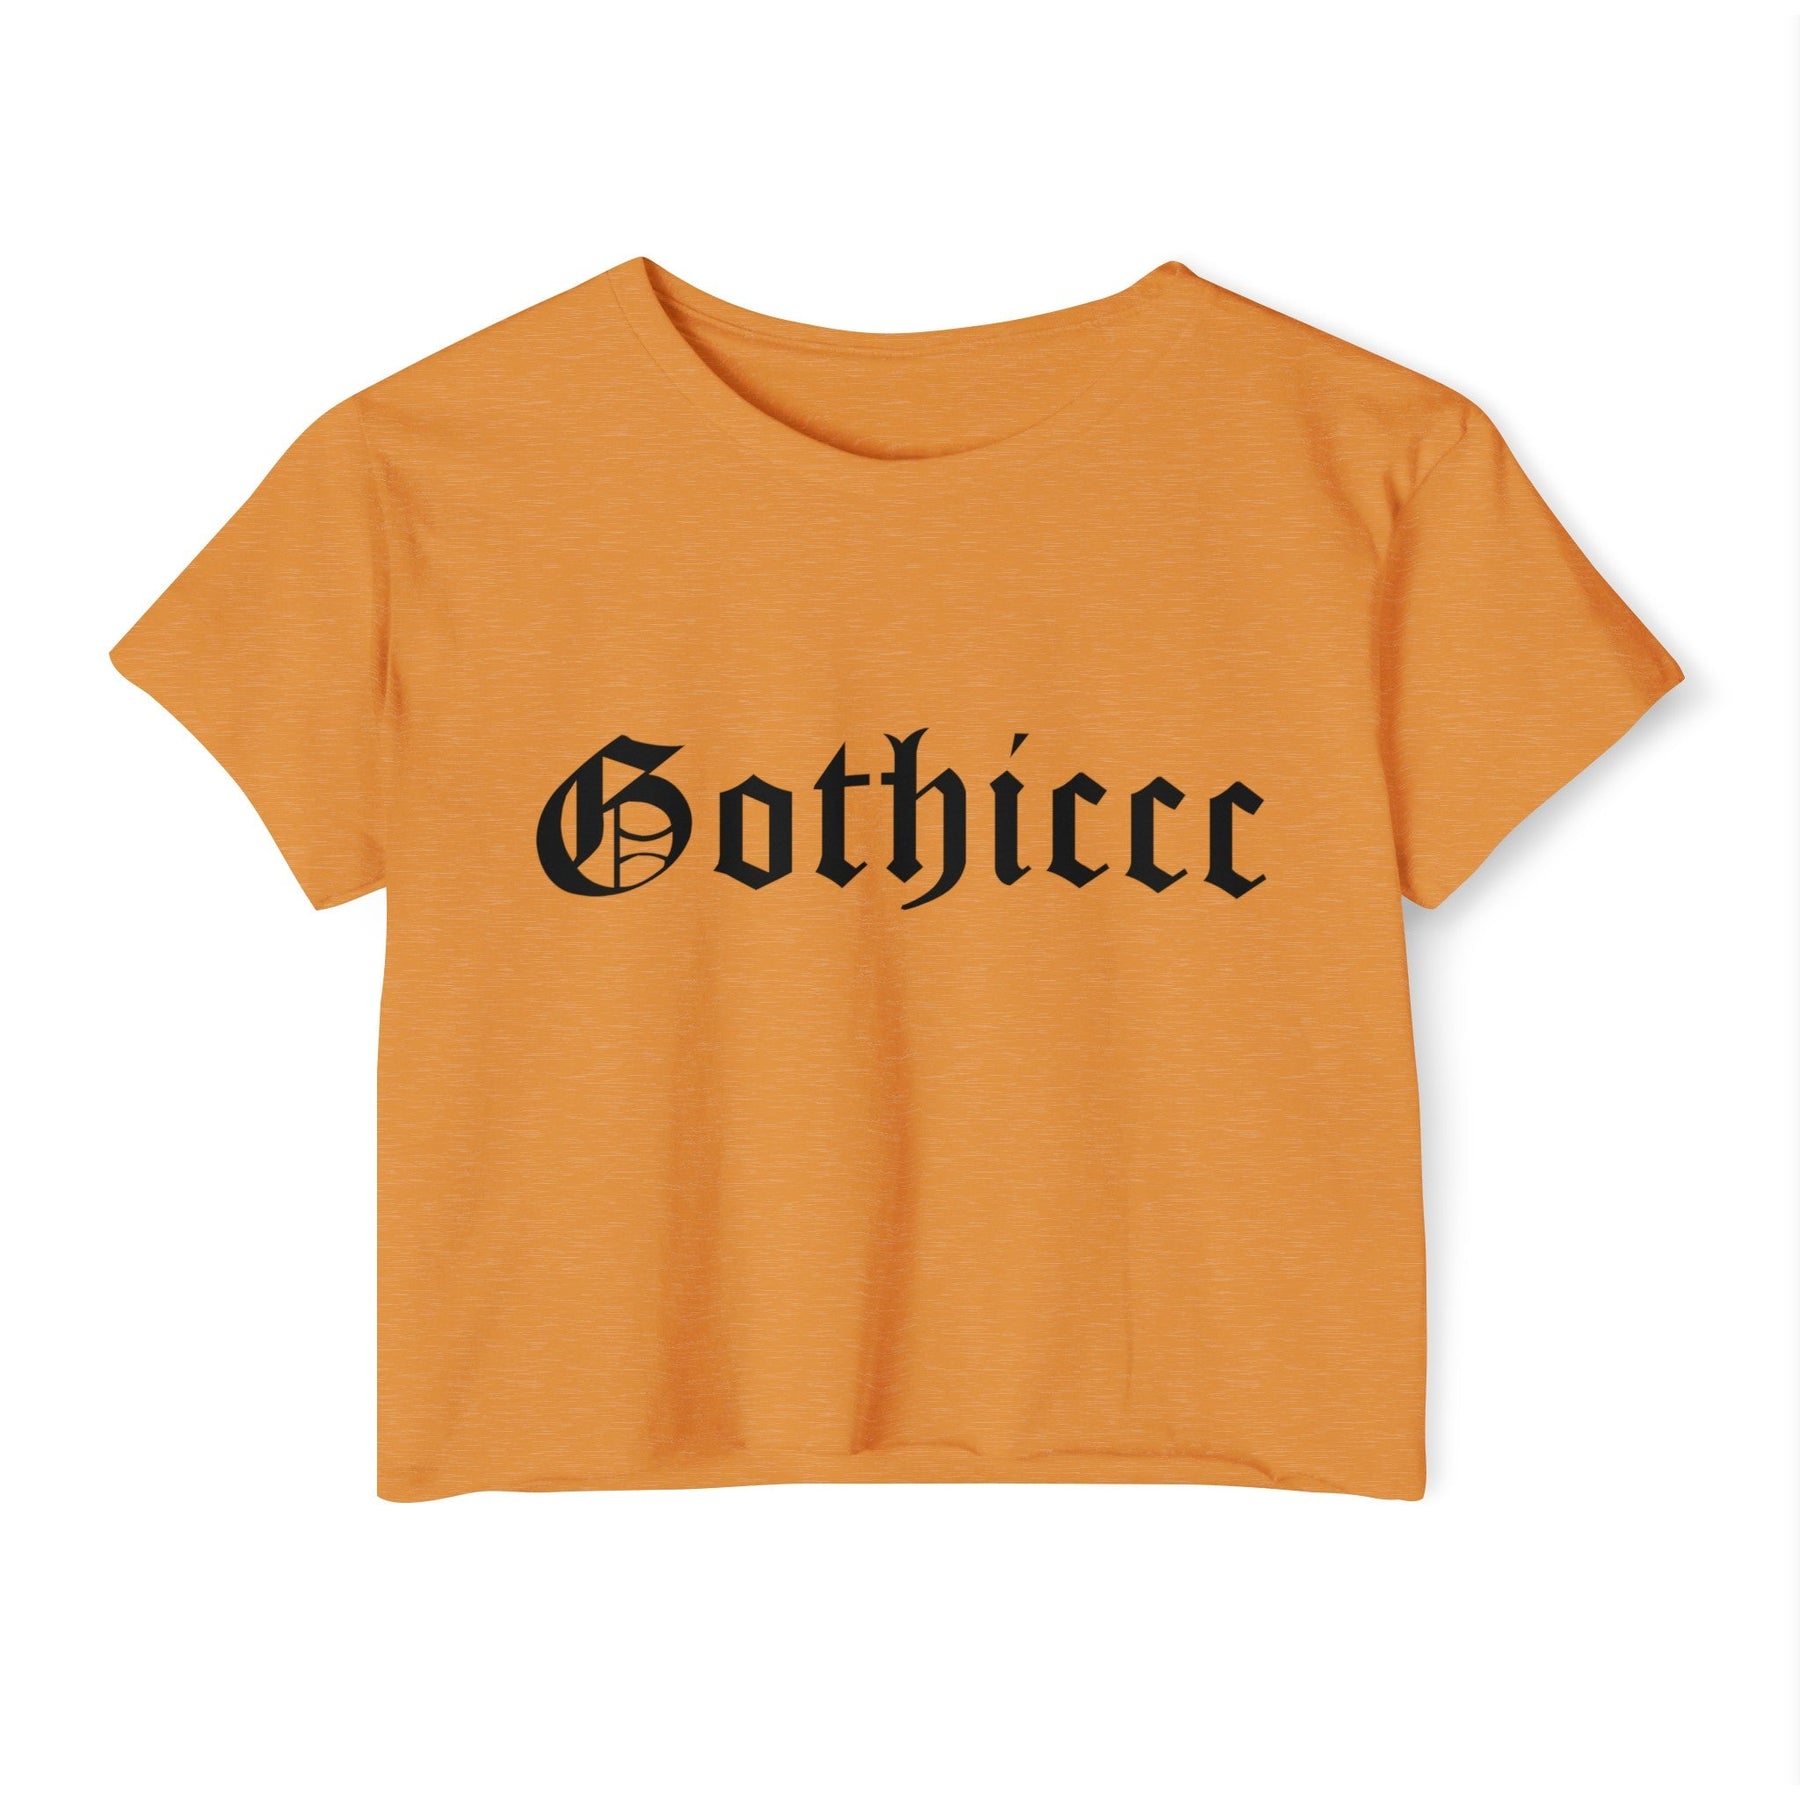 Gothiccc Women's Lightweight Crop Top - Goth Cloth Co.T - Shirt15925972686112505875